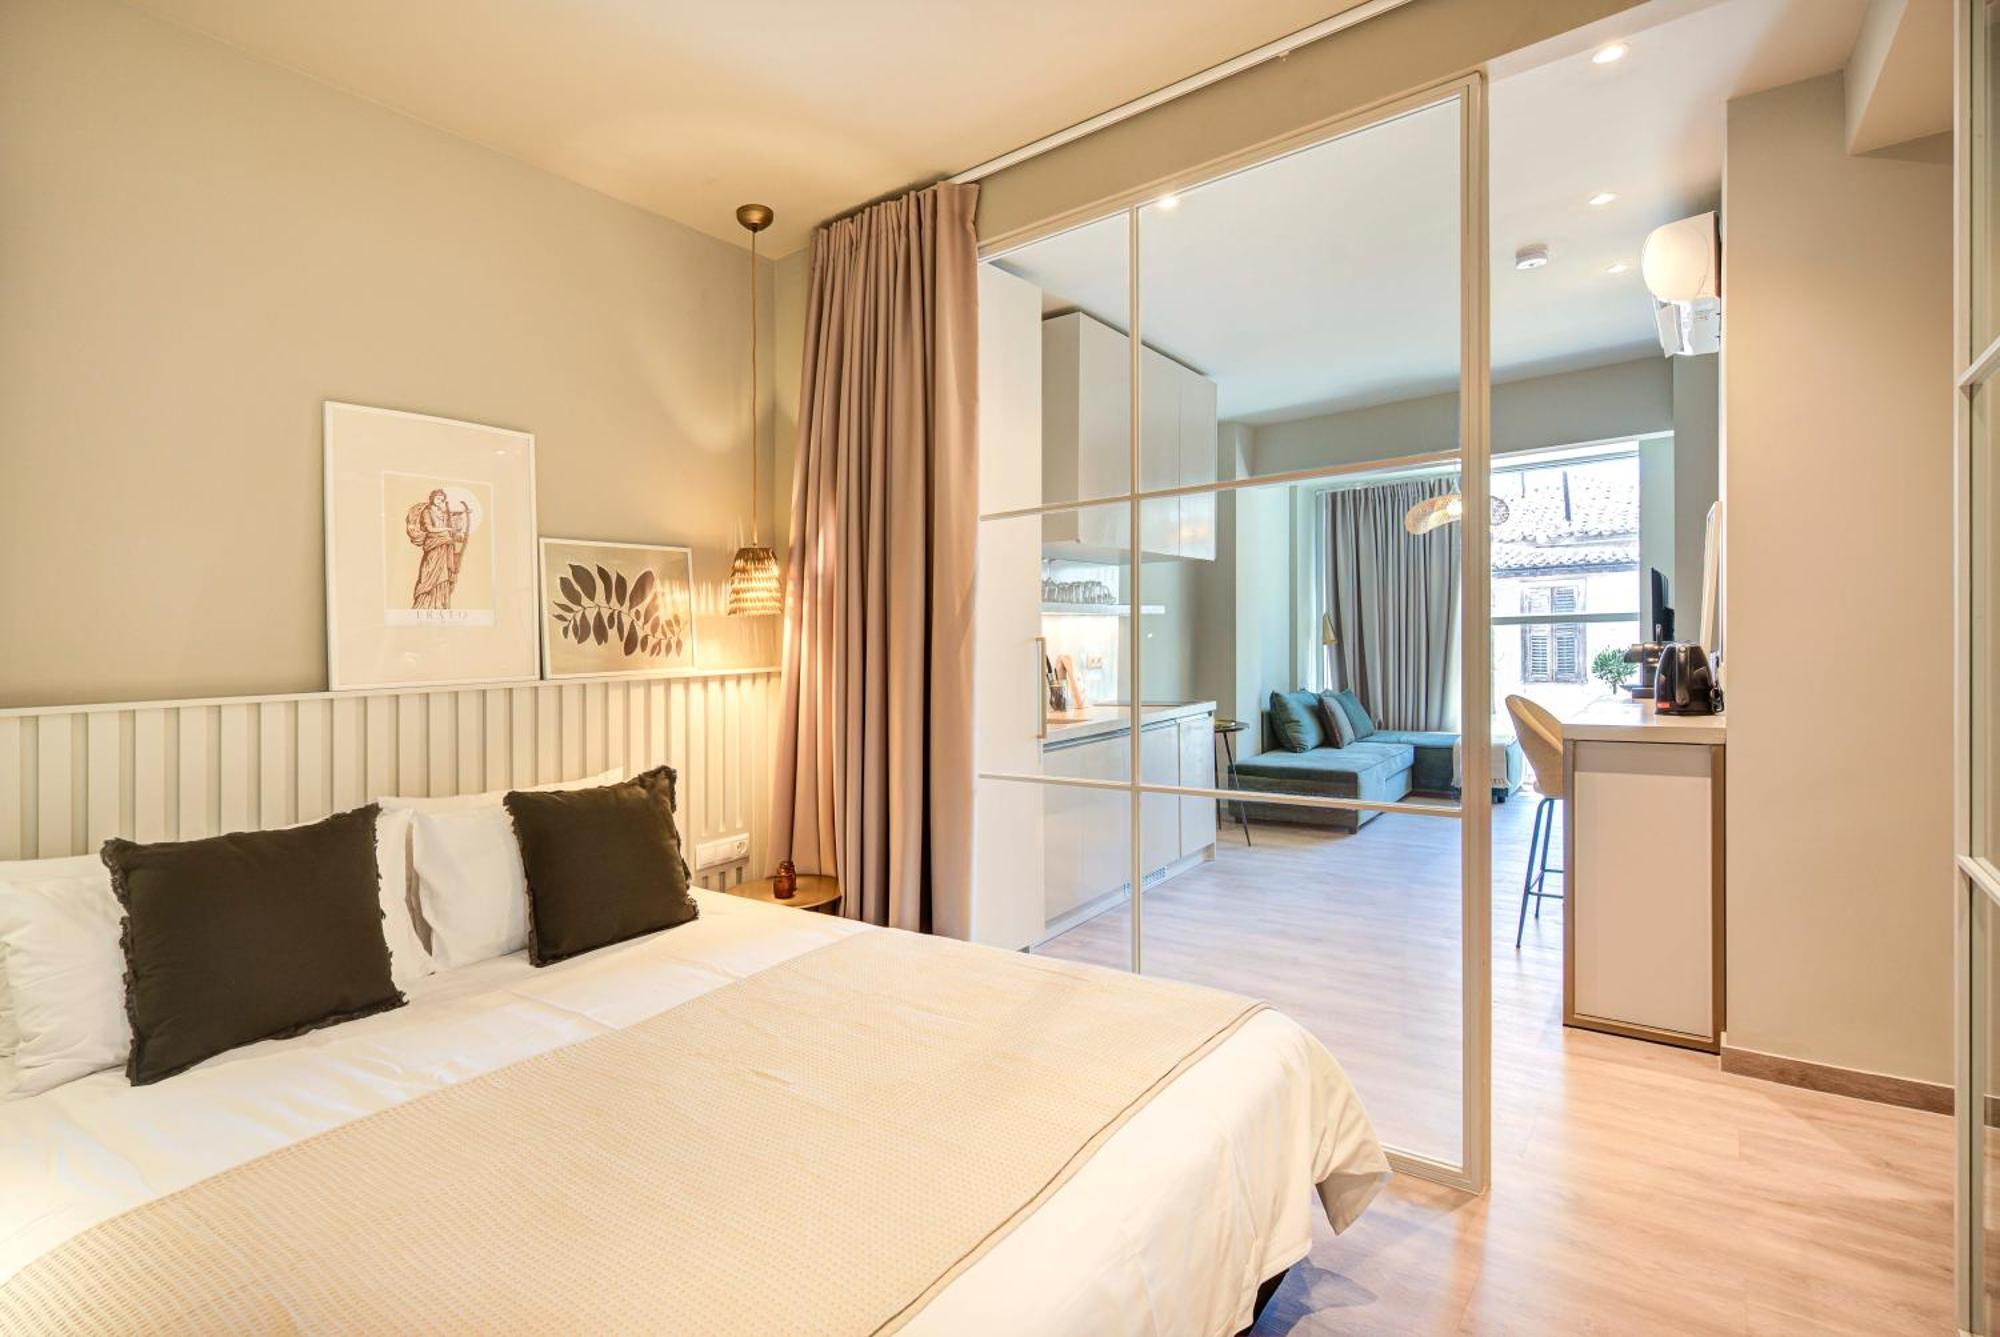 9 Muses Exclusive Suites In Syntagma 雅典 外观 照片